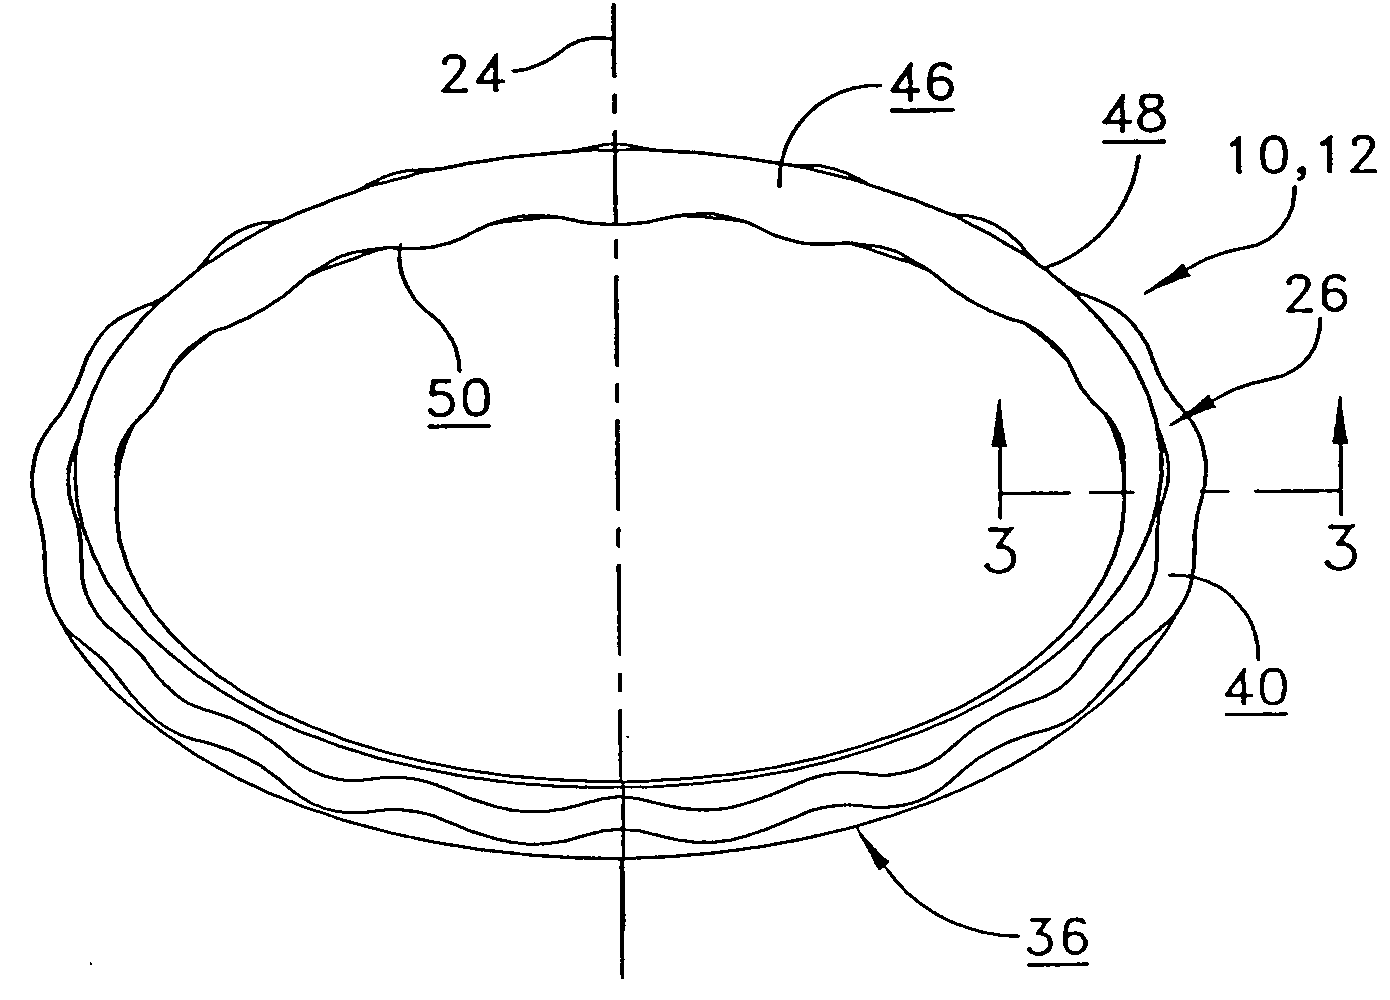 O-ring for incrementally adjustable incision liner and retractor